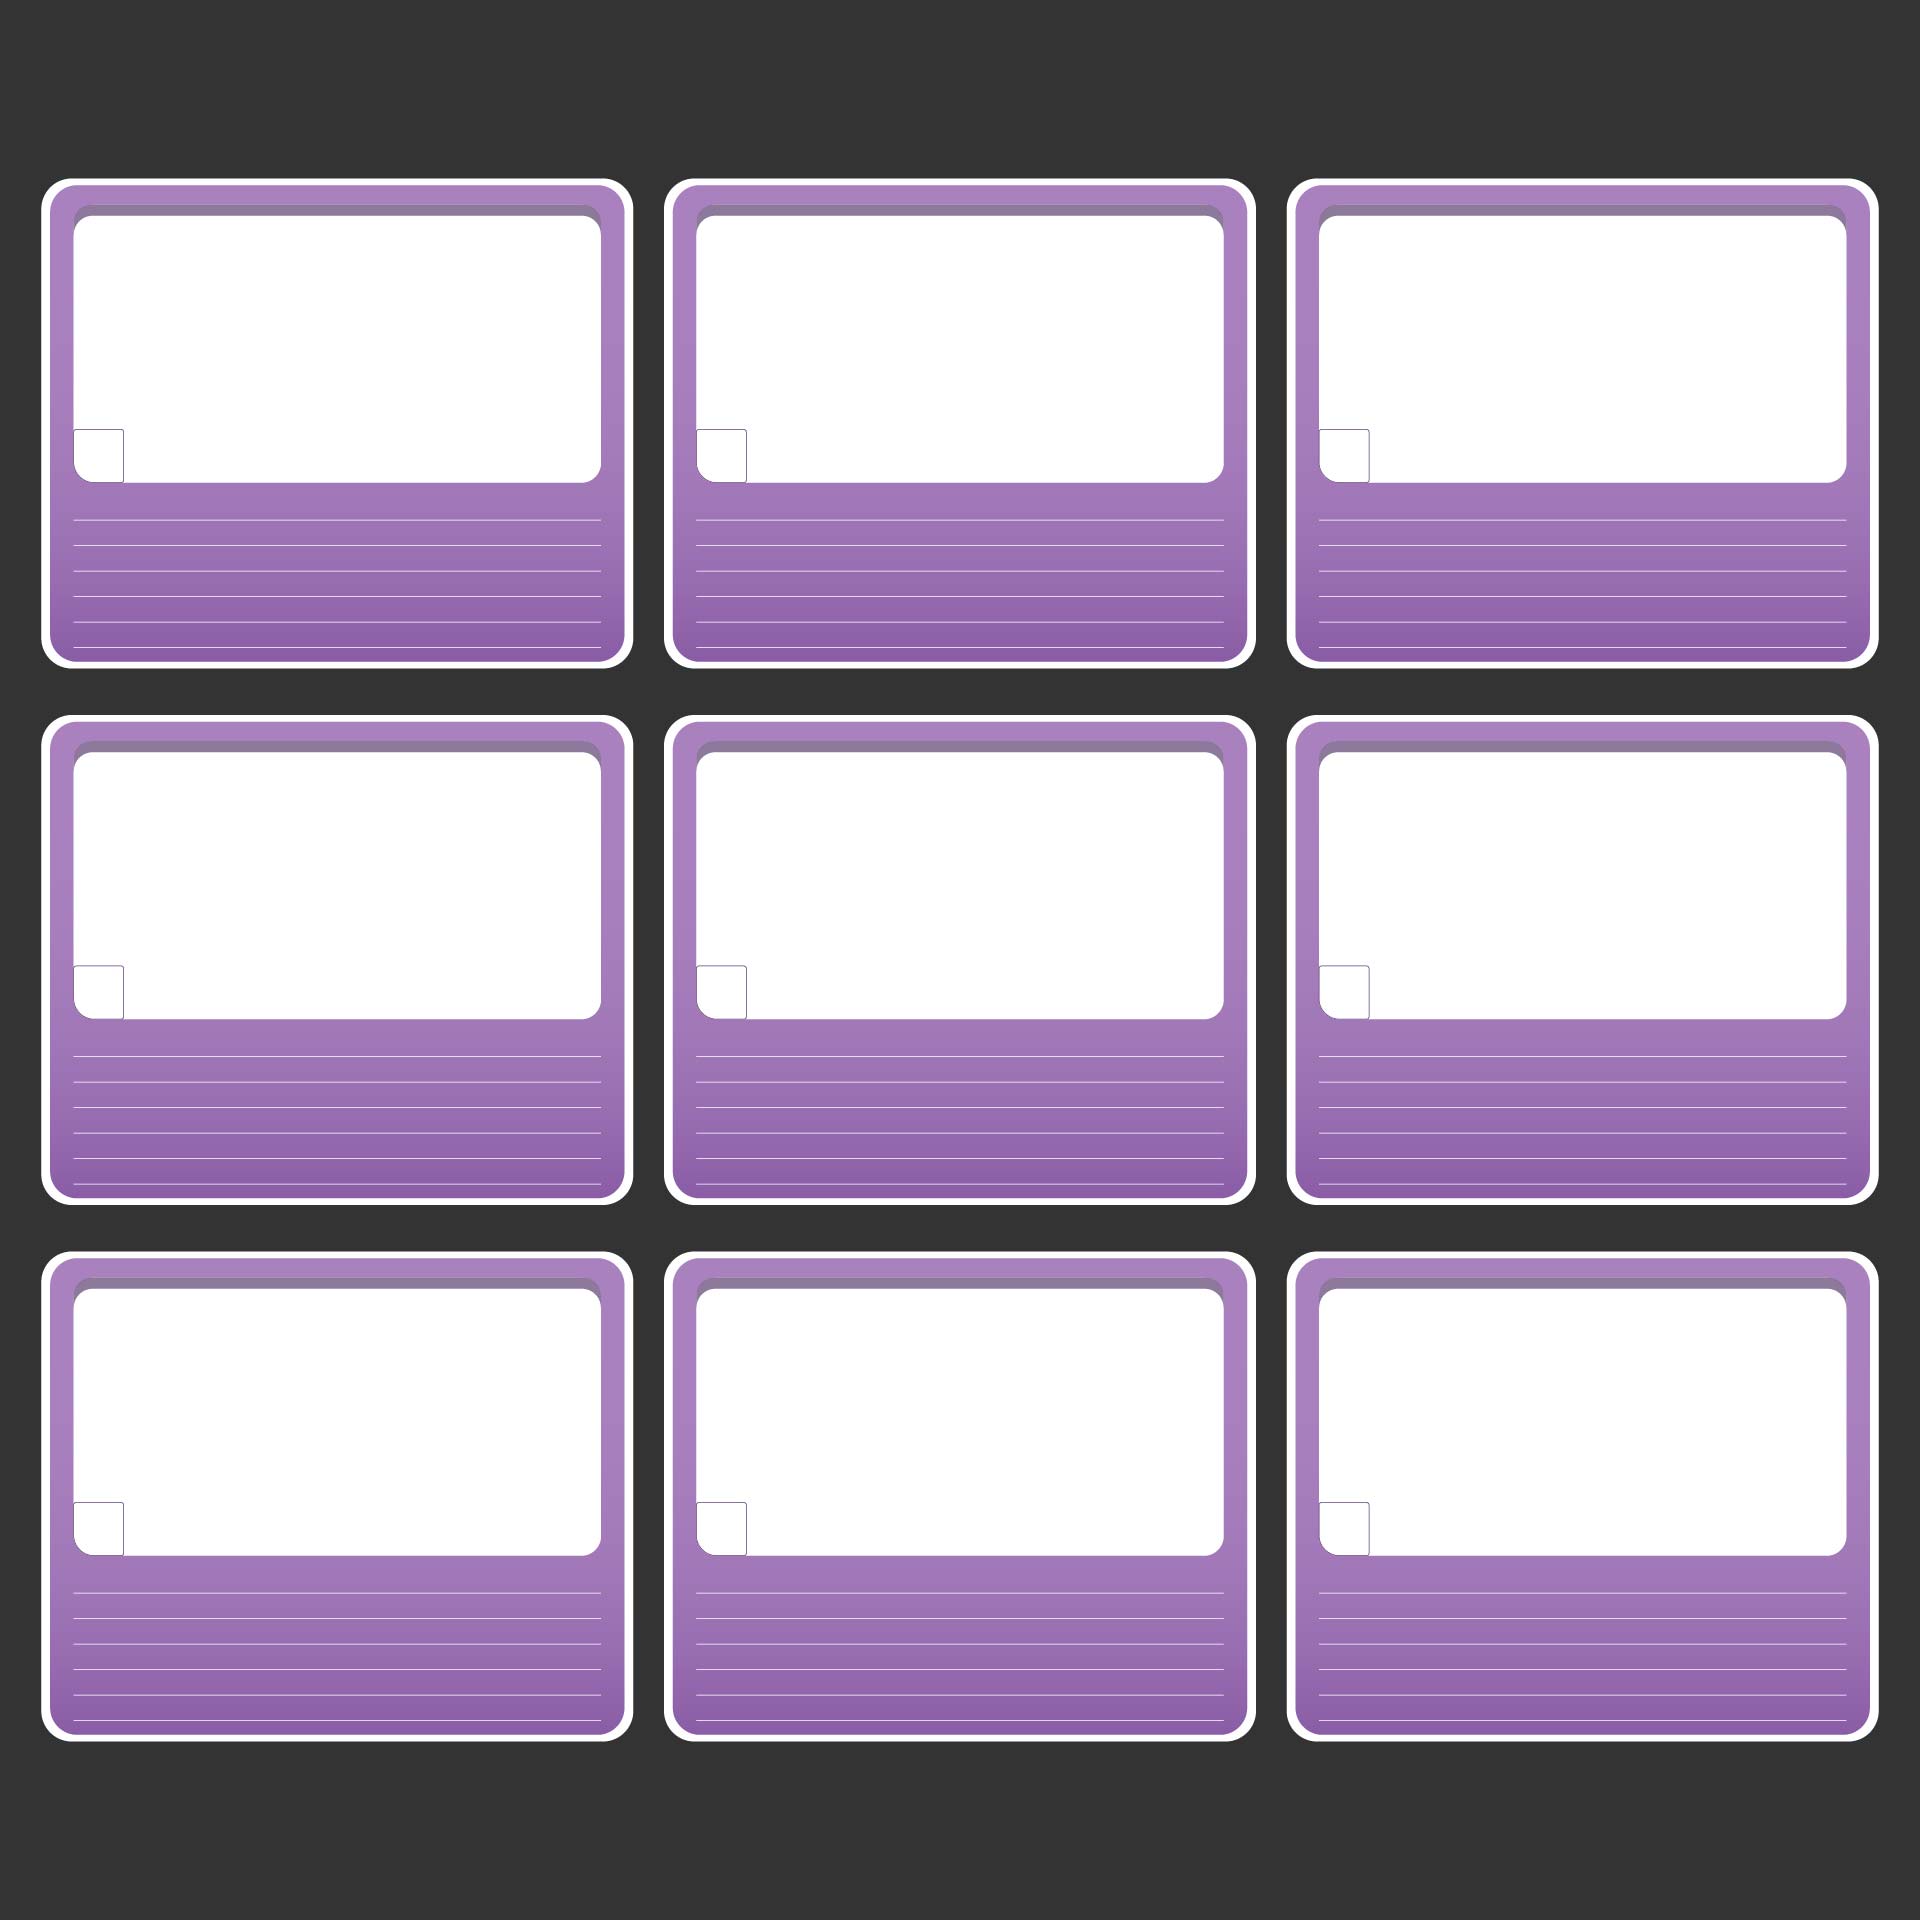 Paper Storyboard Templates